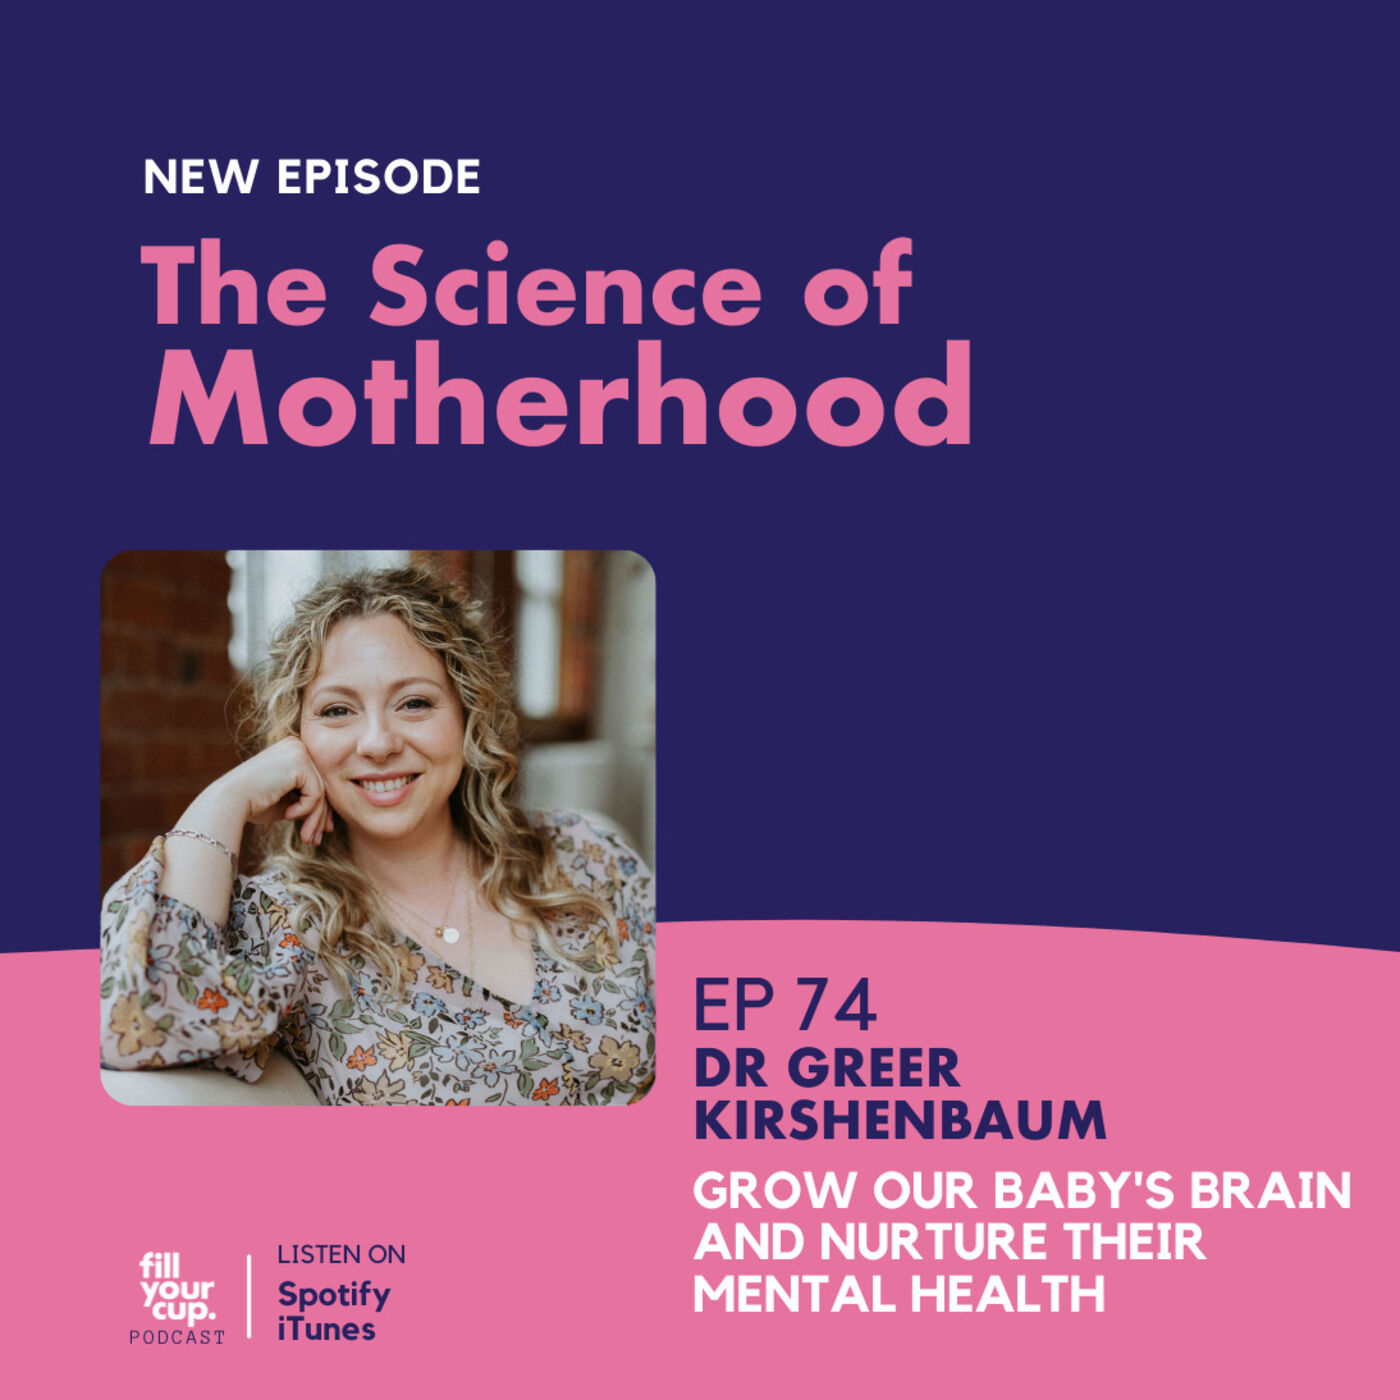 Ep 74. Dr Greer Kirshenbaum - How To Grow Your Baby's Brain and Nurture Their Mental Health